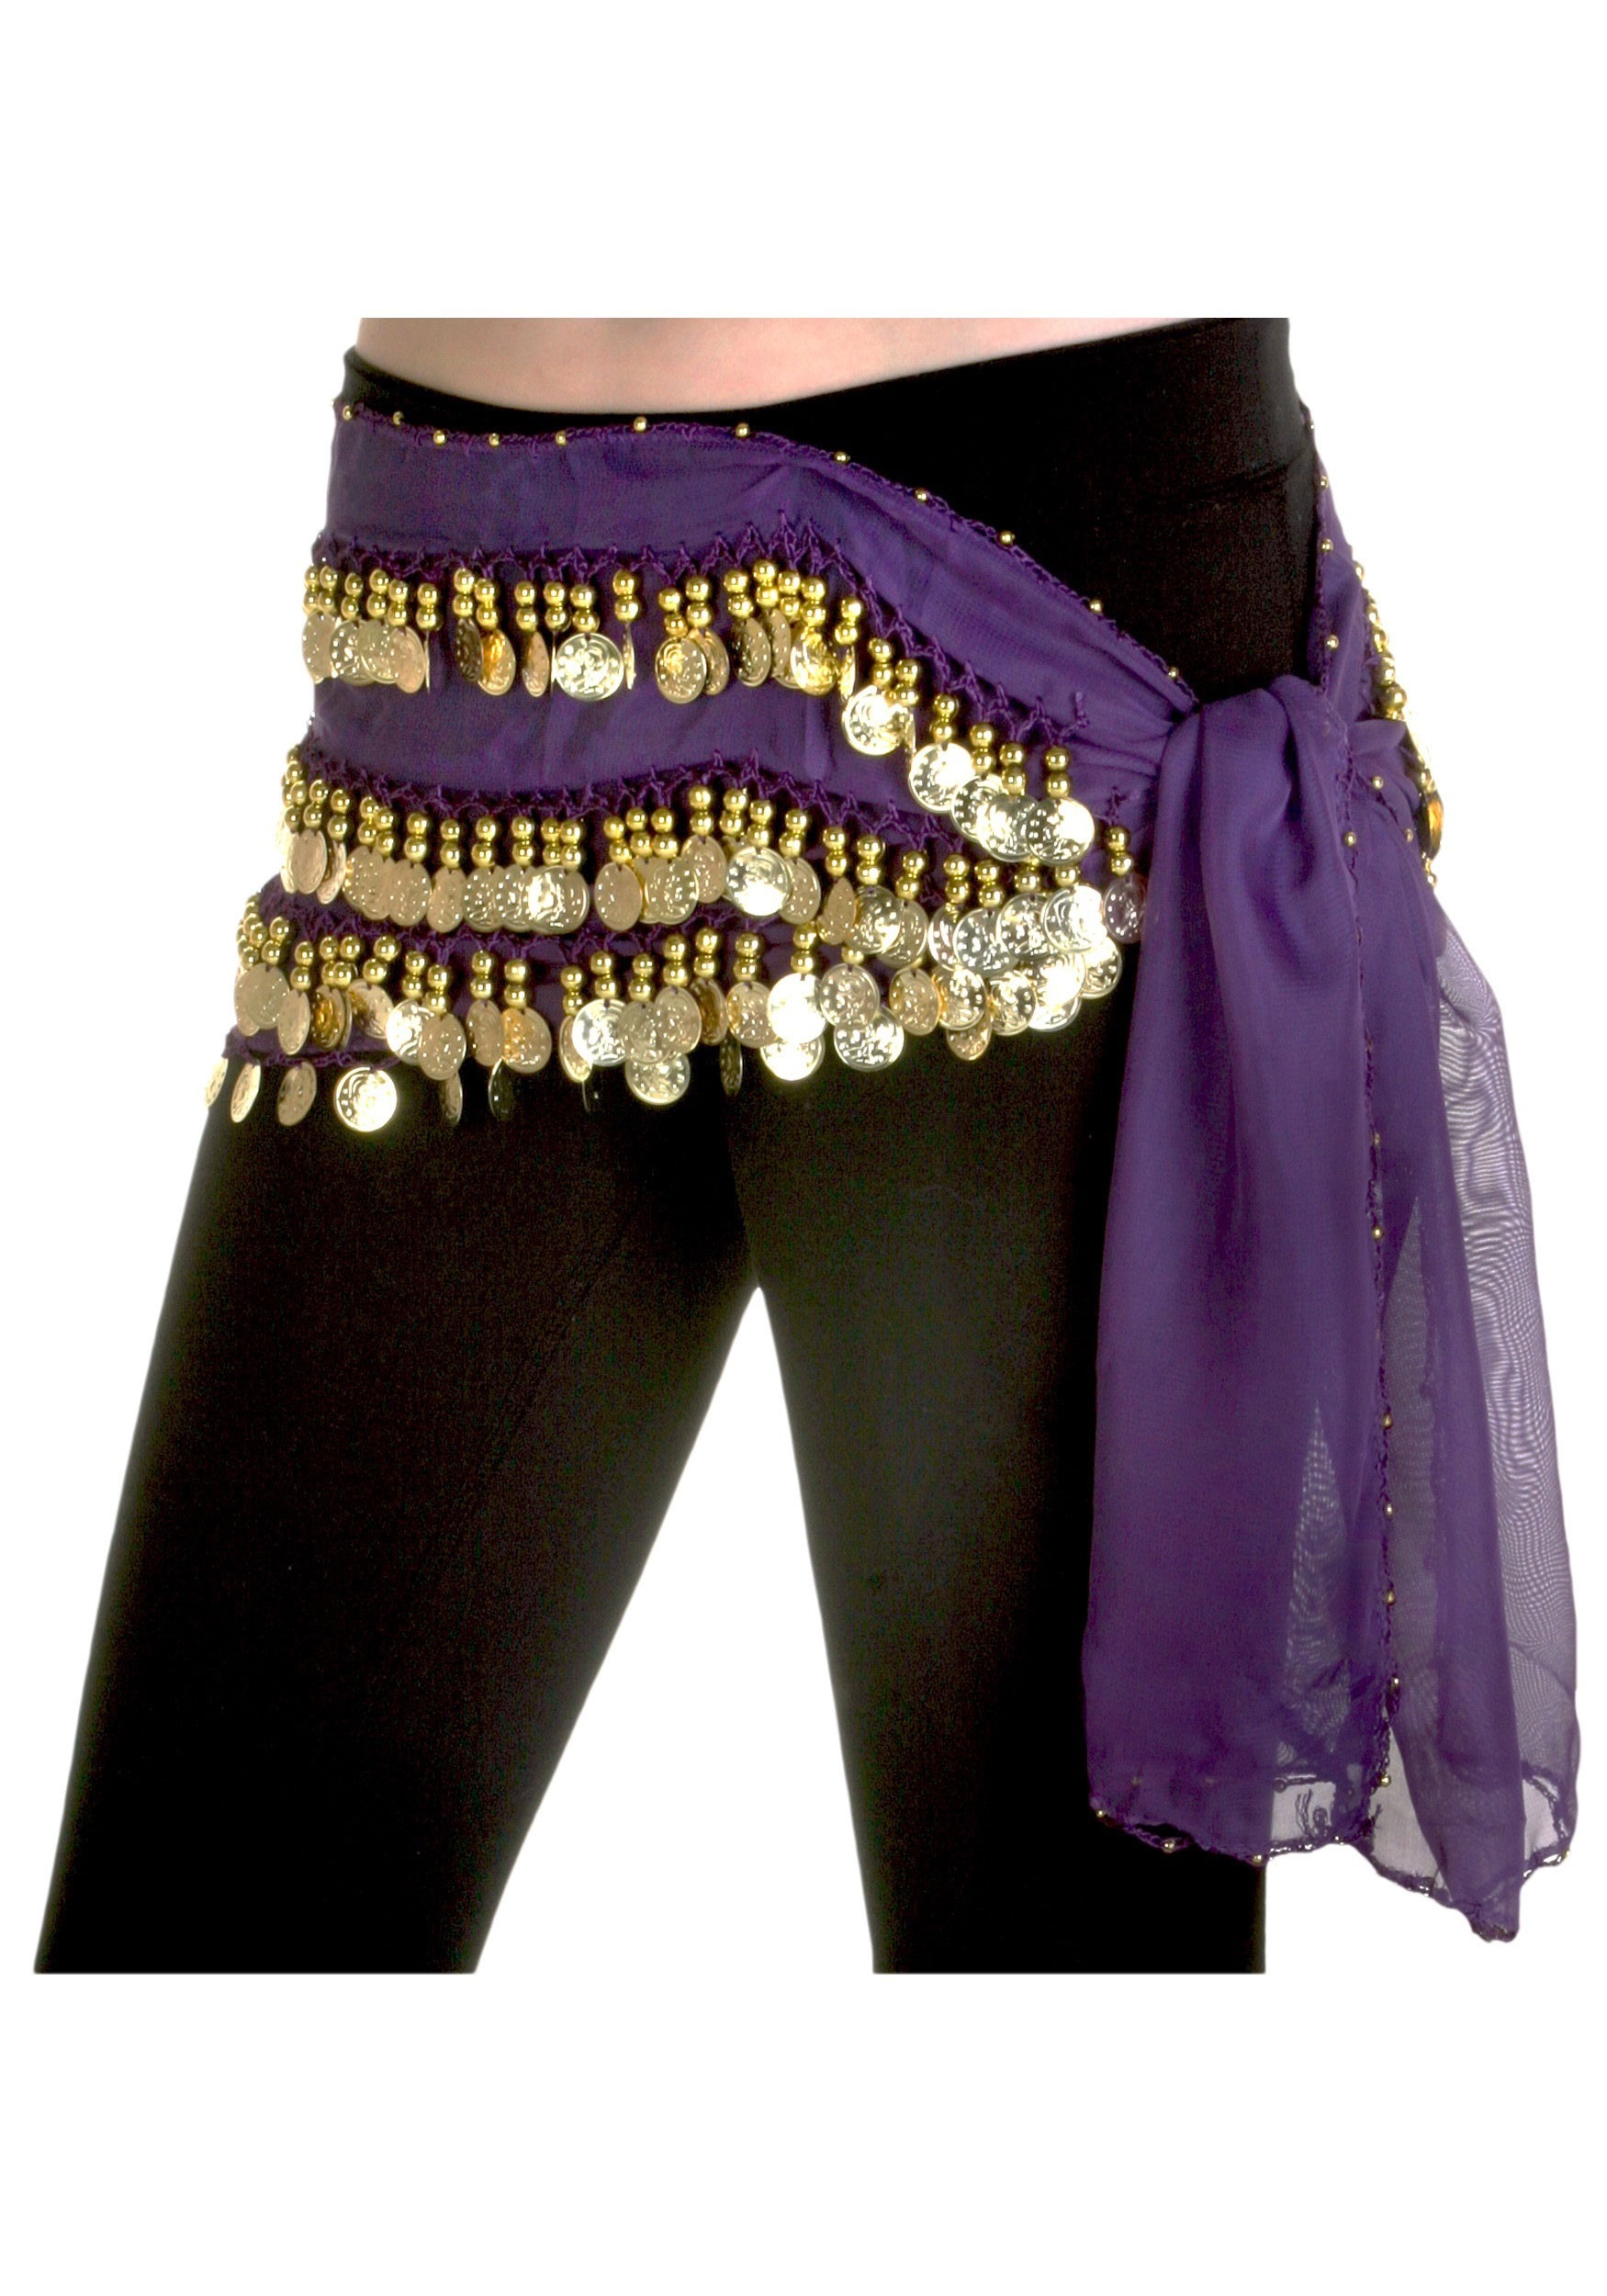 https://images.halloweencostumes.com/products/12581/1-1/purple-belly-dance-hip-scarf.jpg